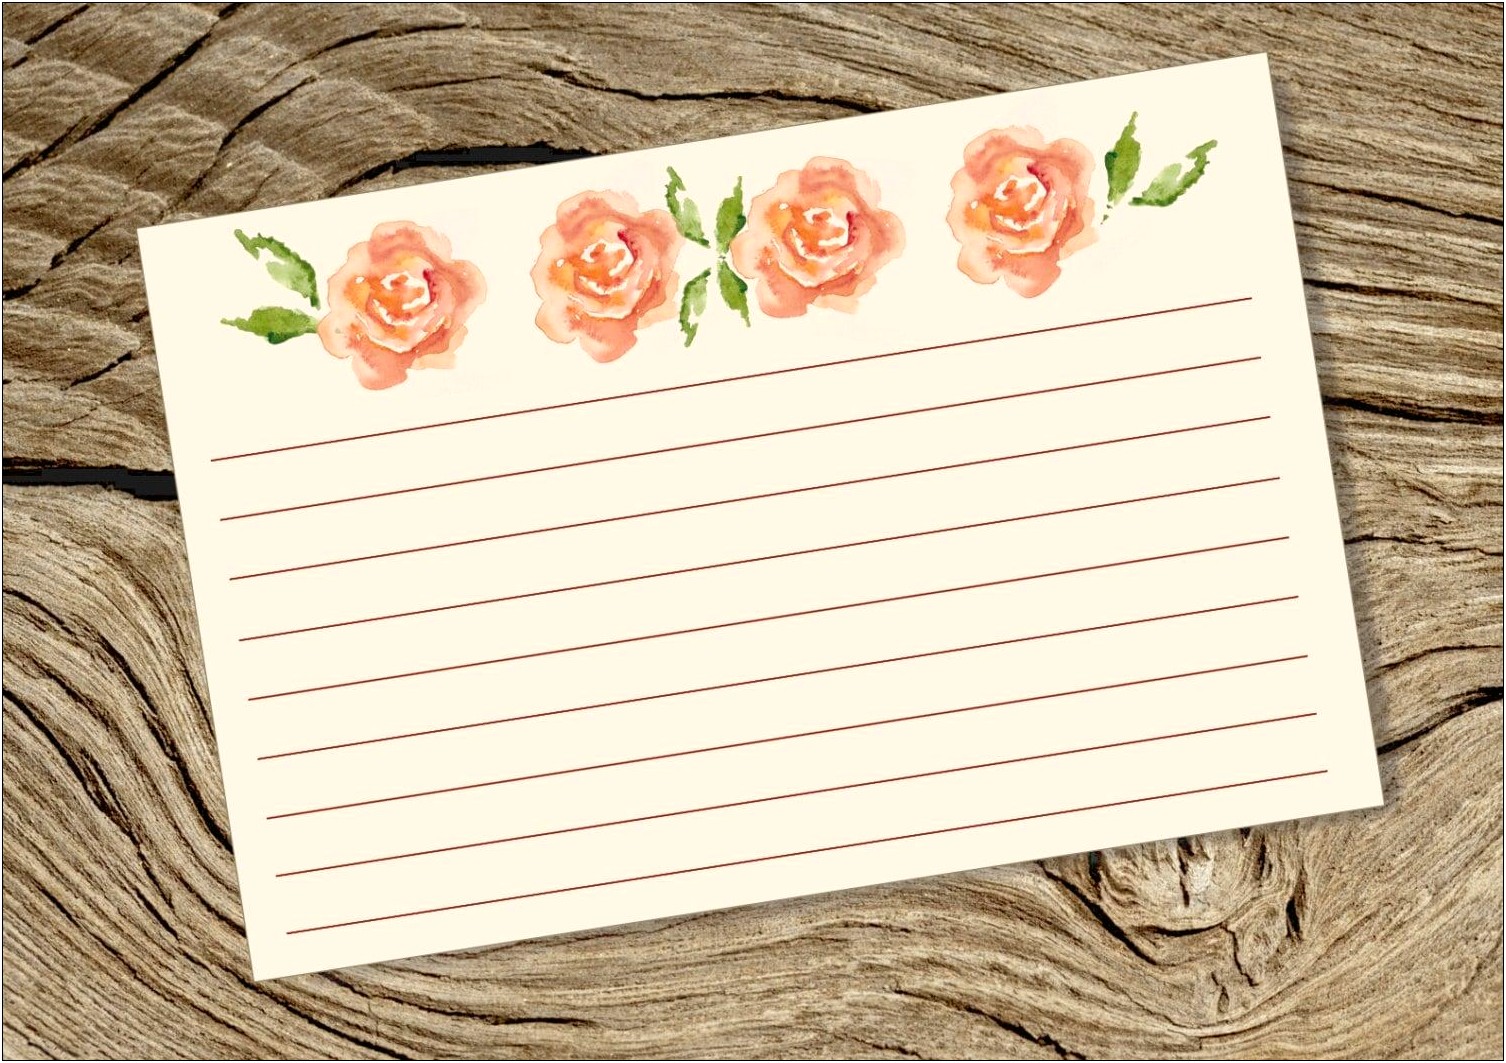 4x6 Index Card Template Word 2016